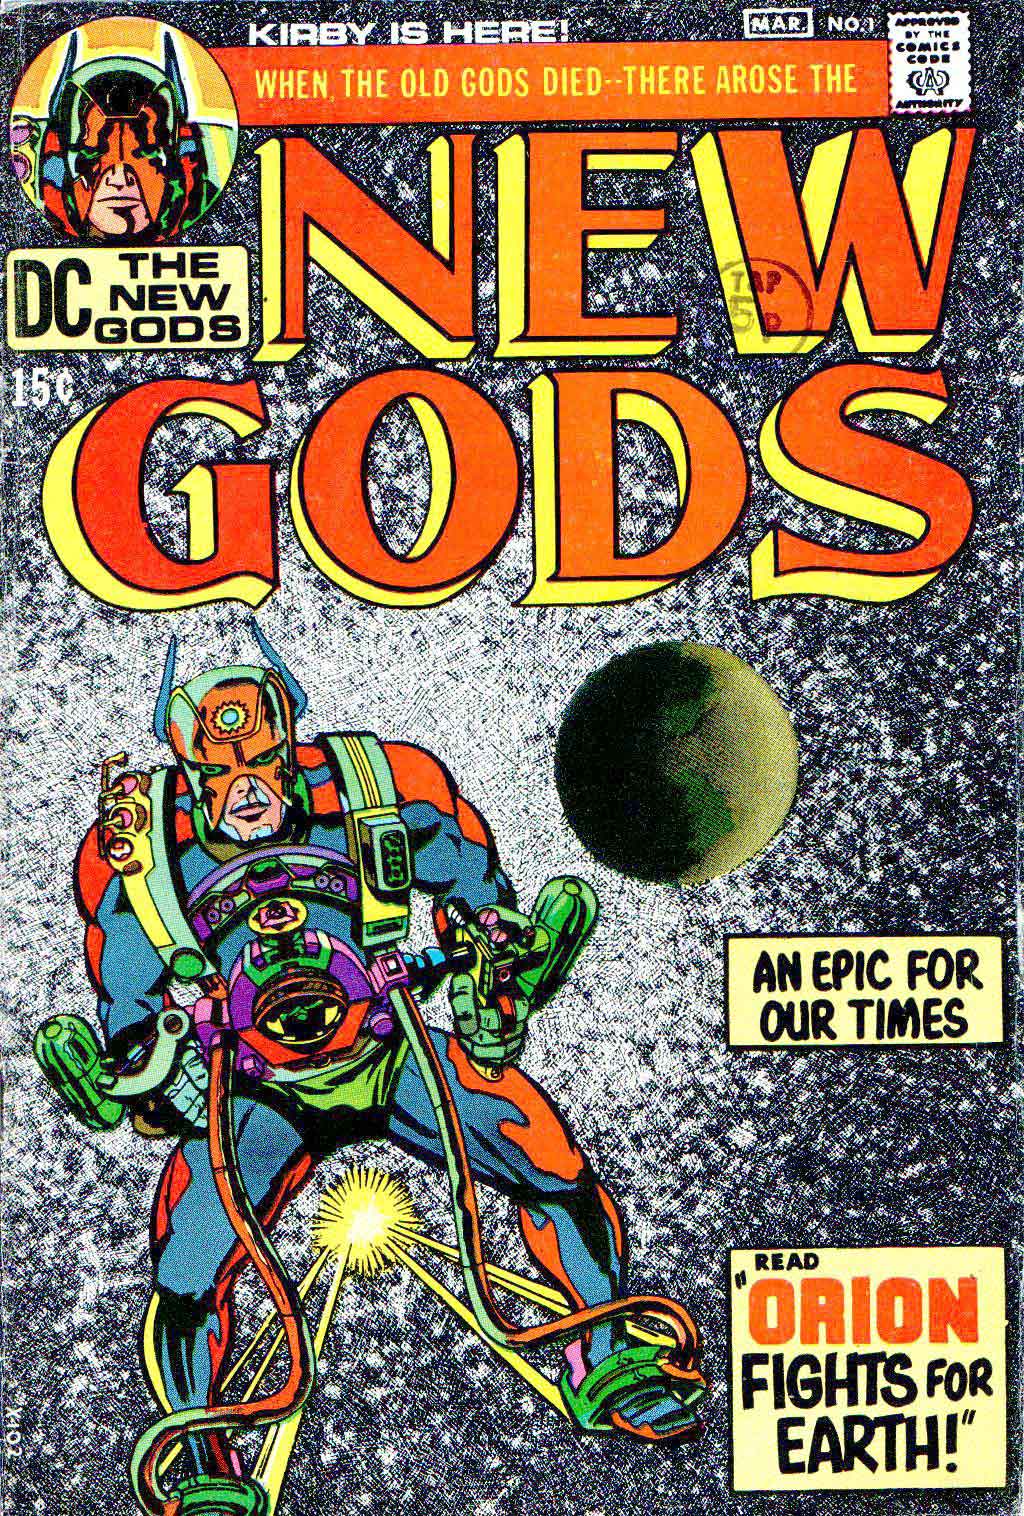 New Gods v1 #1 dc bronze age comic book cover art by Jack Kirby